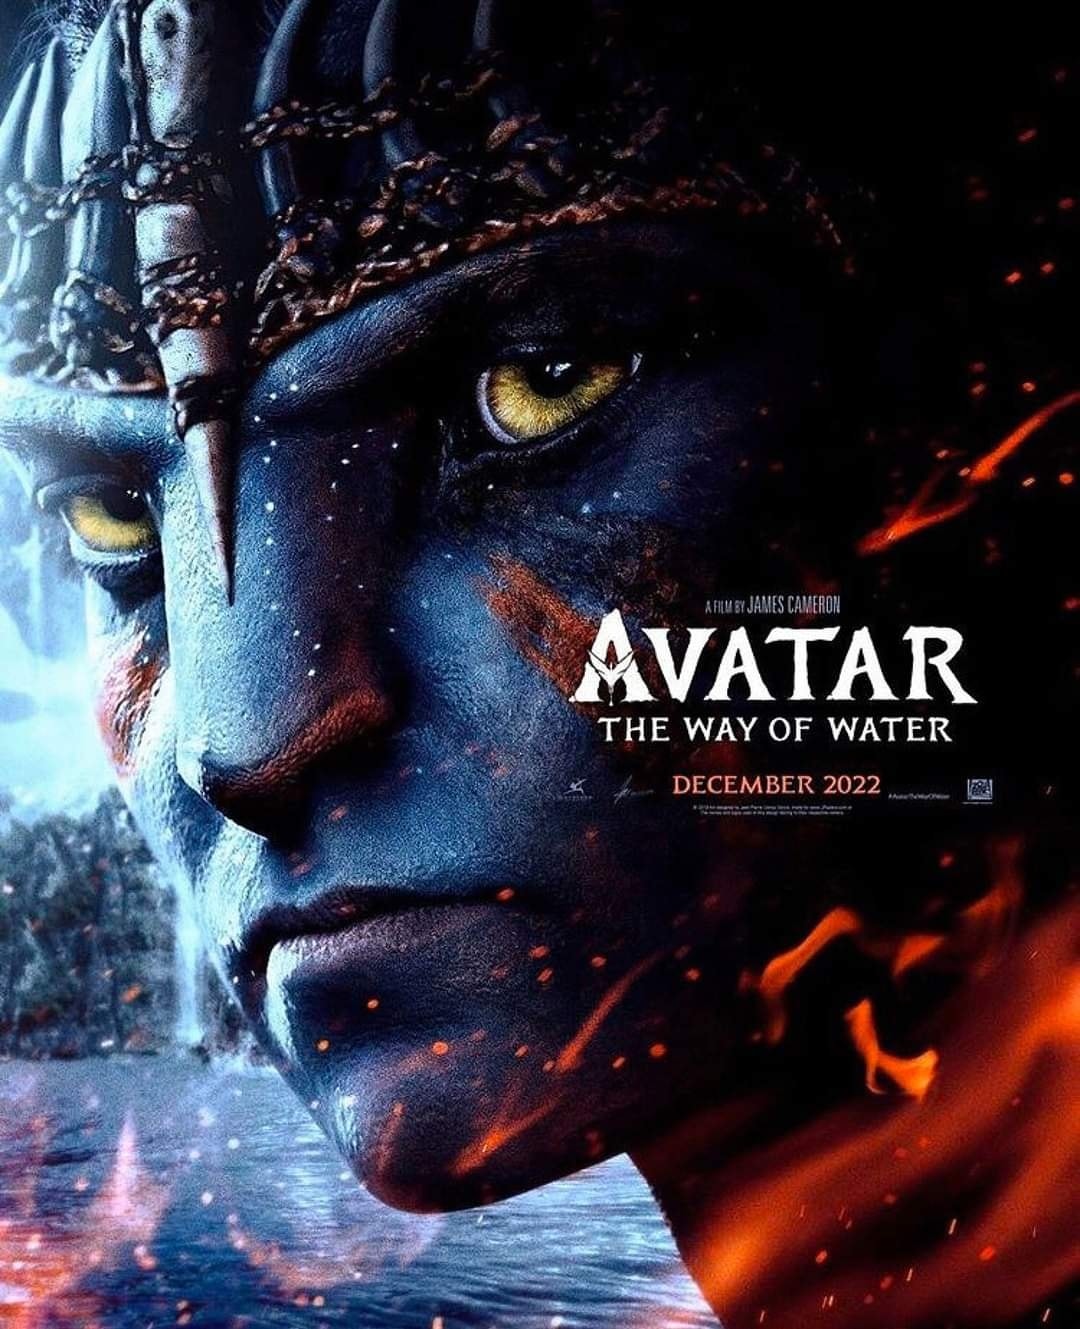 James Camerons Avatar 2 titled Avatar The Way of Water